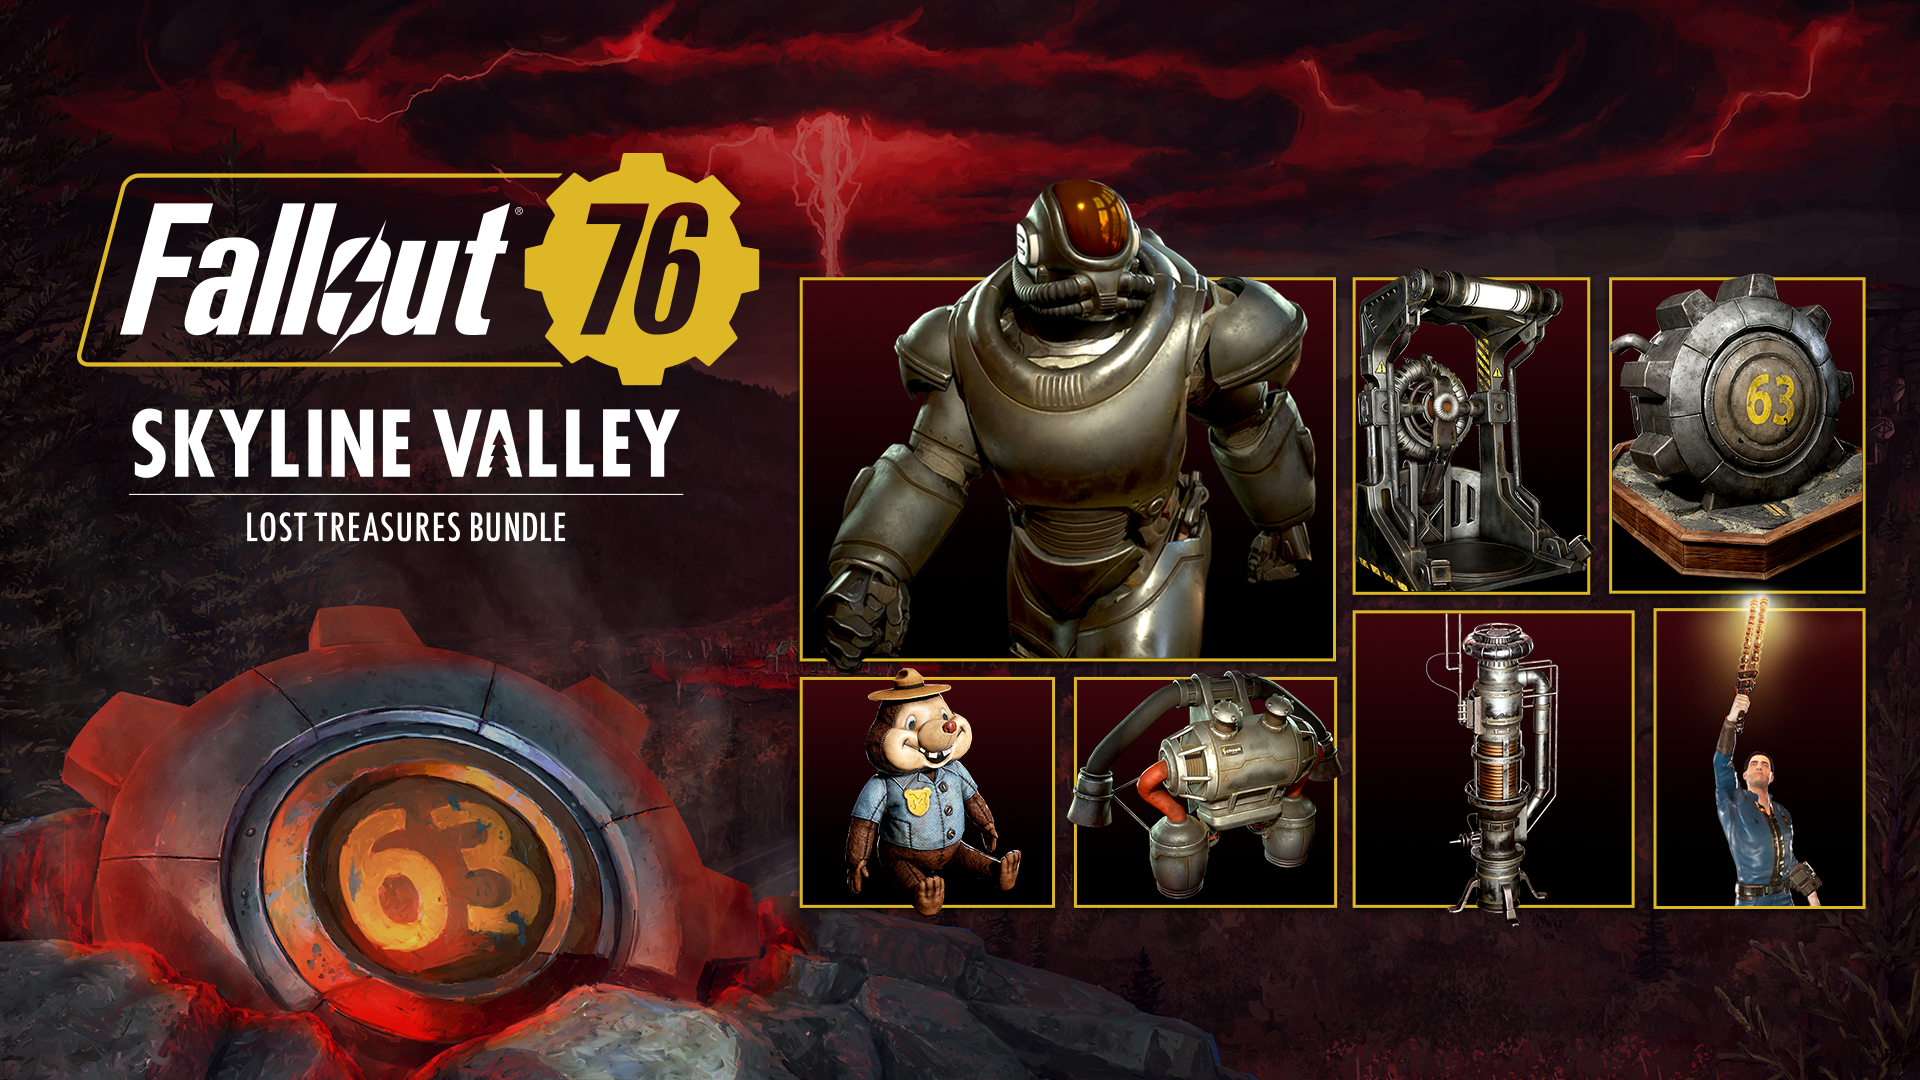 Fallout 76 - Skyline Valley